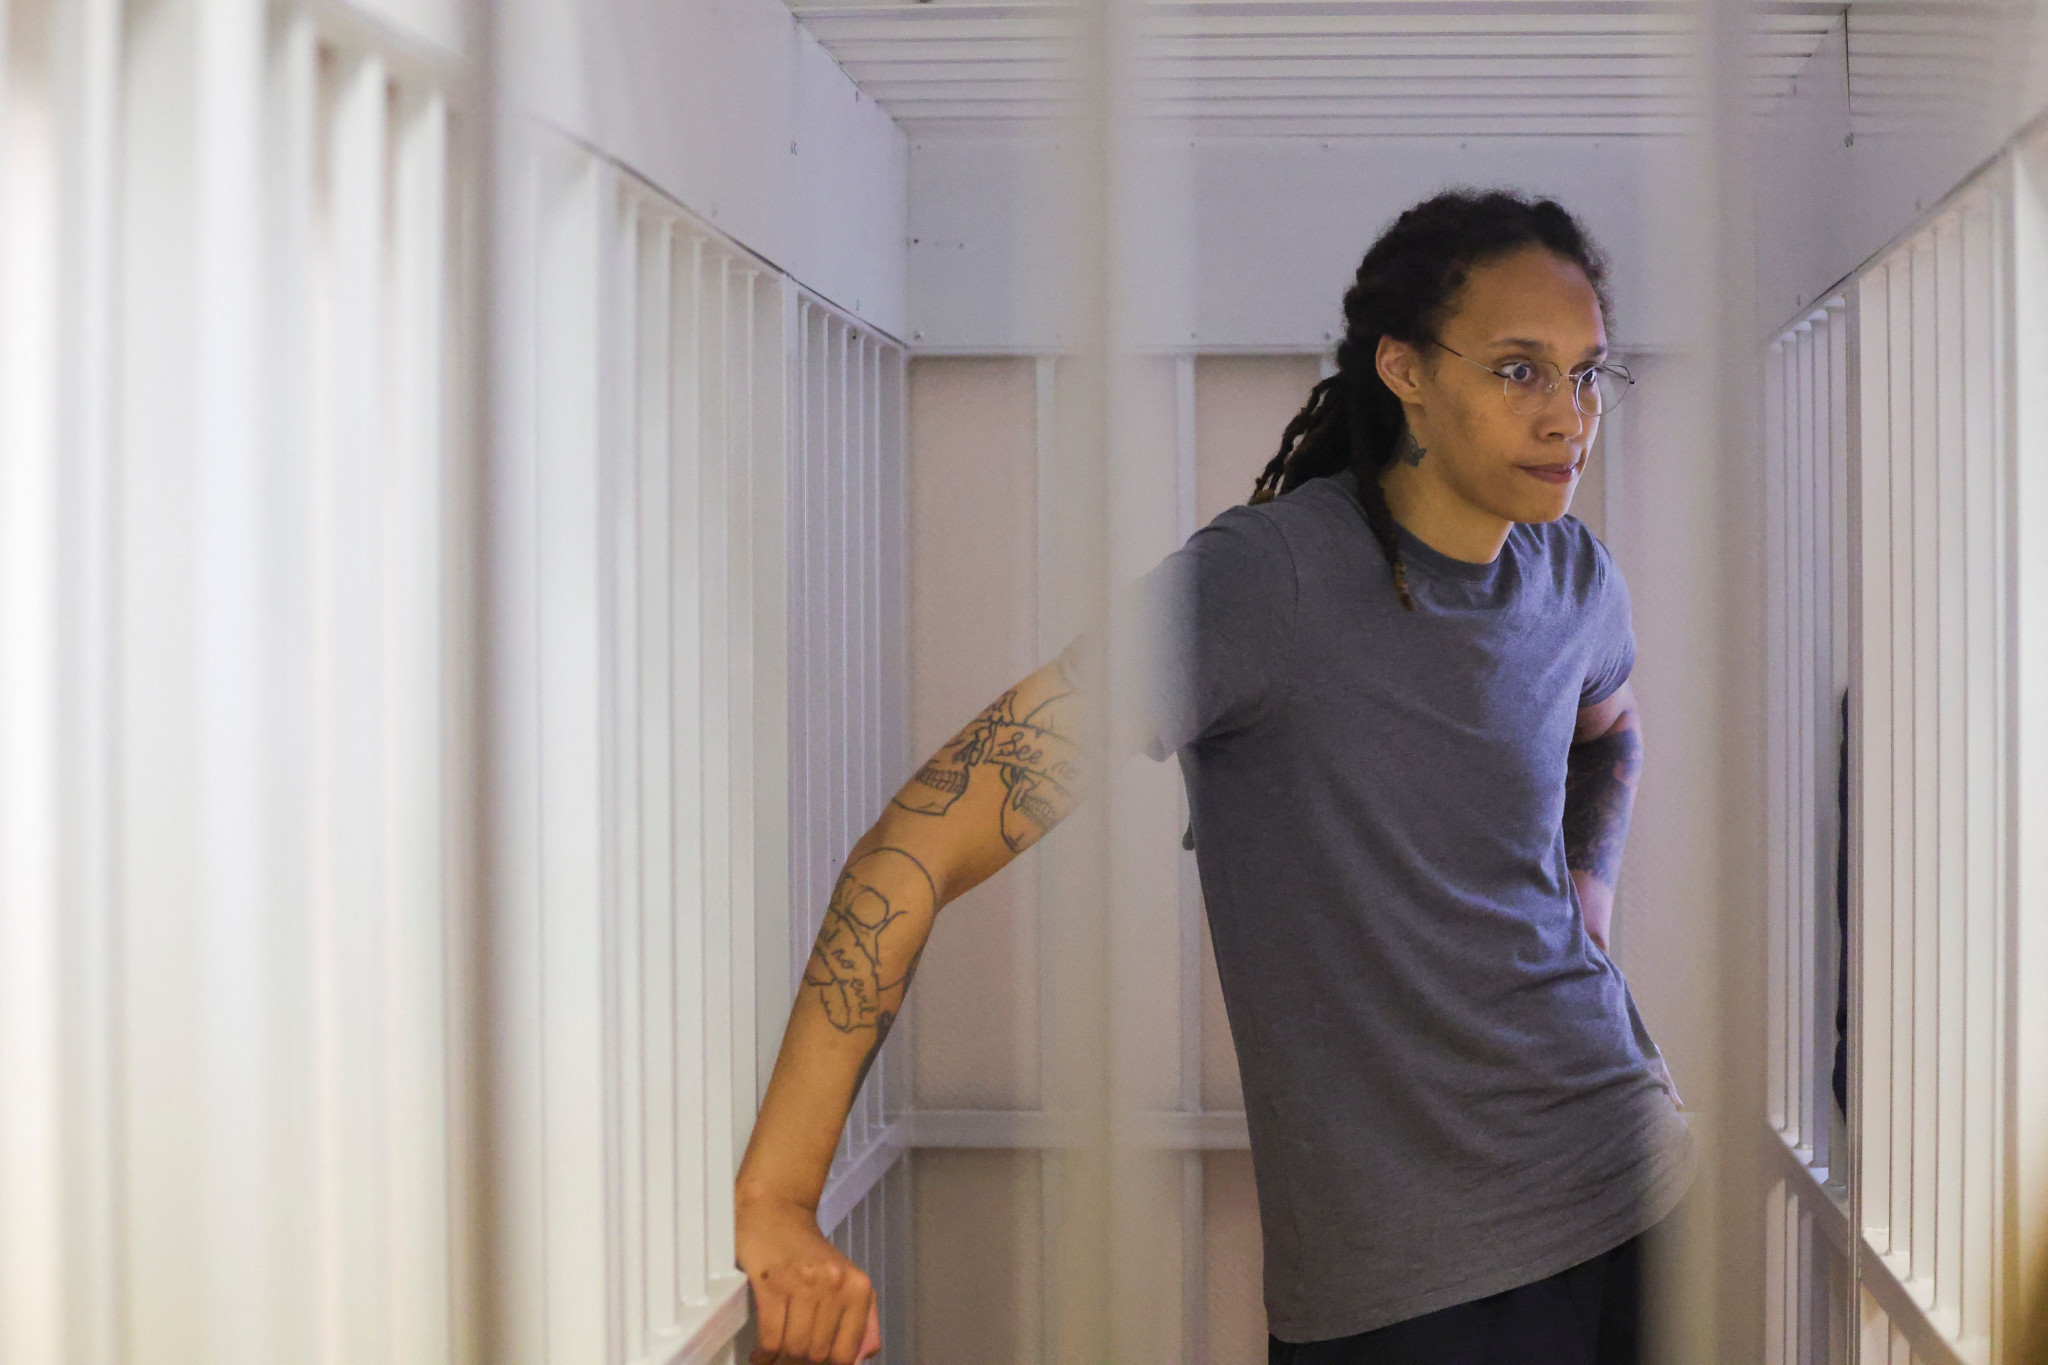 Double Olympic basketball champion Brittney Griner returned home last month following a period inside a Russian penal colony ©Getty Images